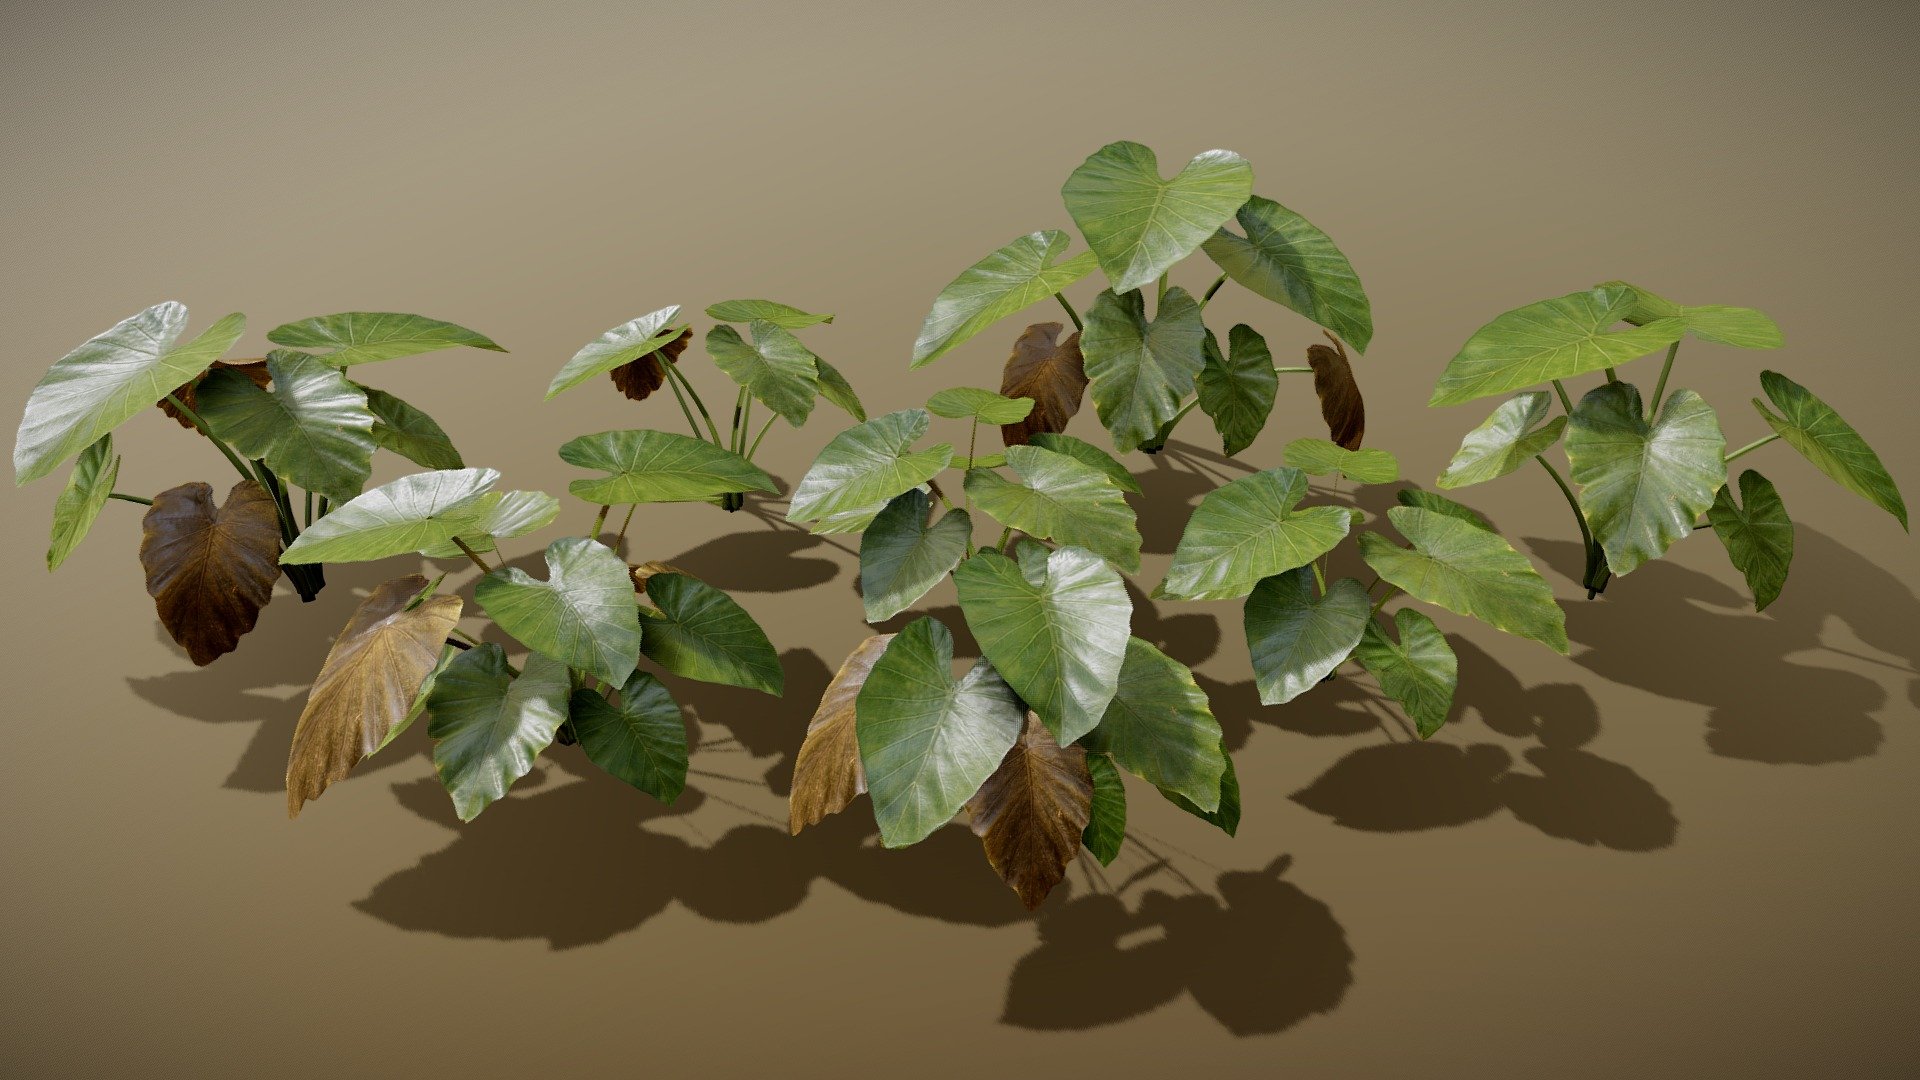 This package contains 8 variations. 4 variations with low geometry and 4 with an extra material and 3D branches.

Details

Game Ready asset

LODs

Textures are 4K resolution (albedo .tif with alpha channel)

8 variations

Maps Sample: https://imgur.com/Zr7m7Vi

If you need more information about how my LODs works visit my instagram account! https://www.instagram.com/p/BxbIK8tBWzZ/

Contact me for any issue or questions! https://www.artstation.com/bpaul/profile - Elephant Ear - Buy Royalty Free 3D model by Paul (@nathan.d1563) 3d model